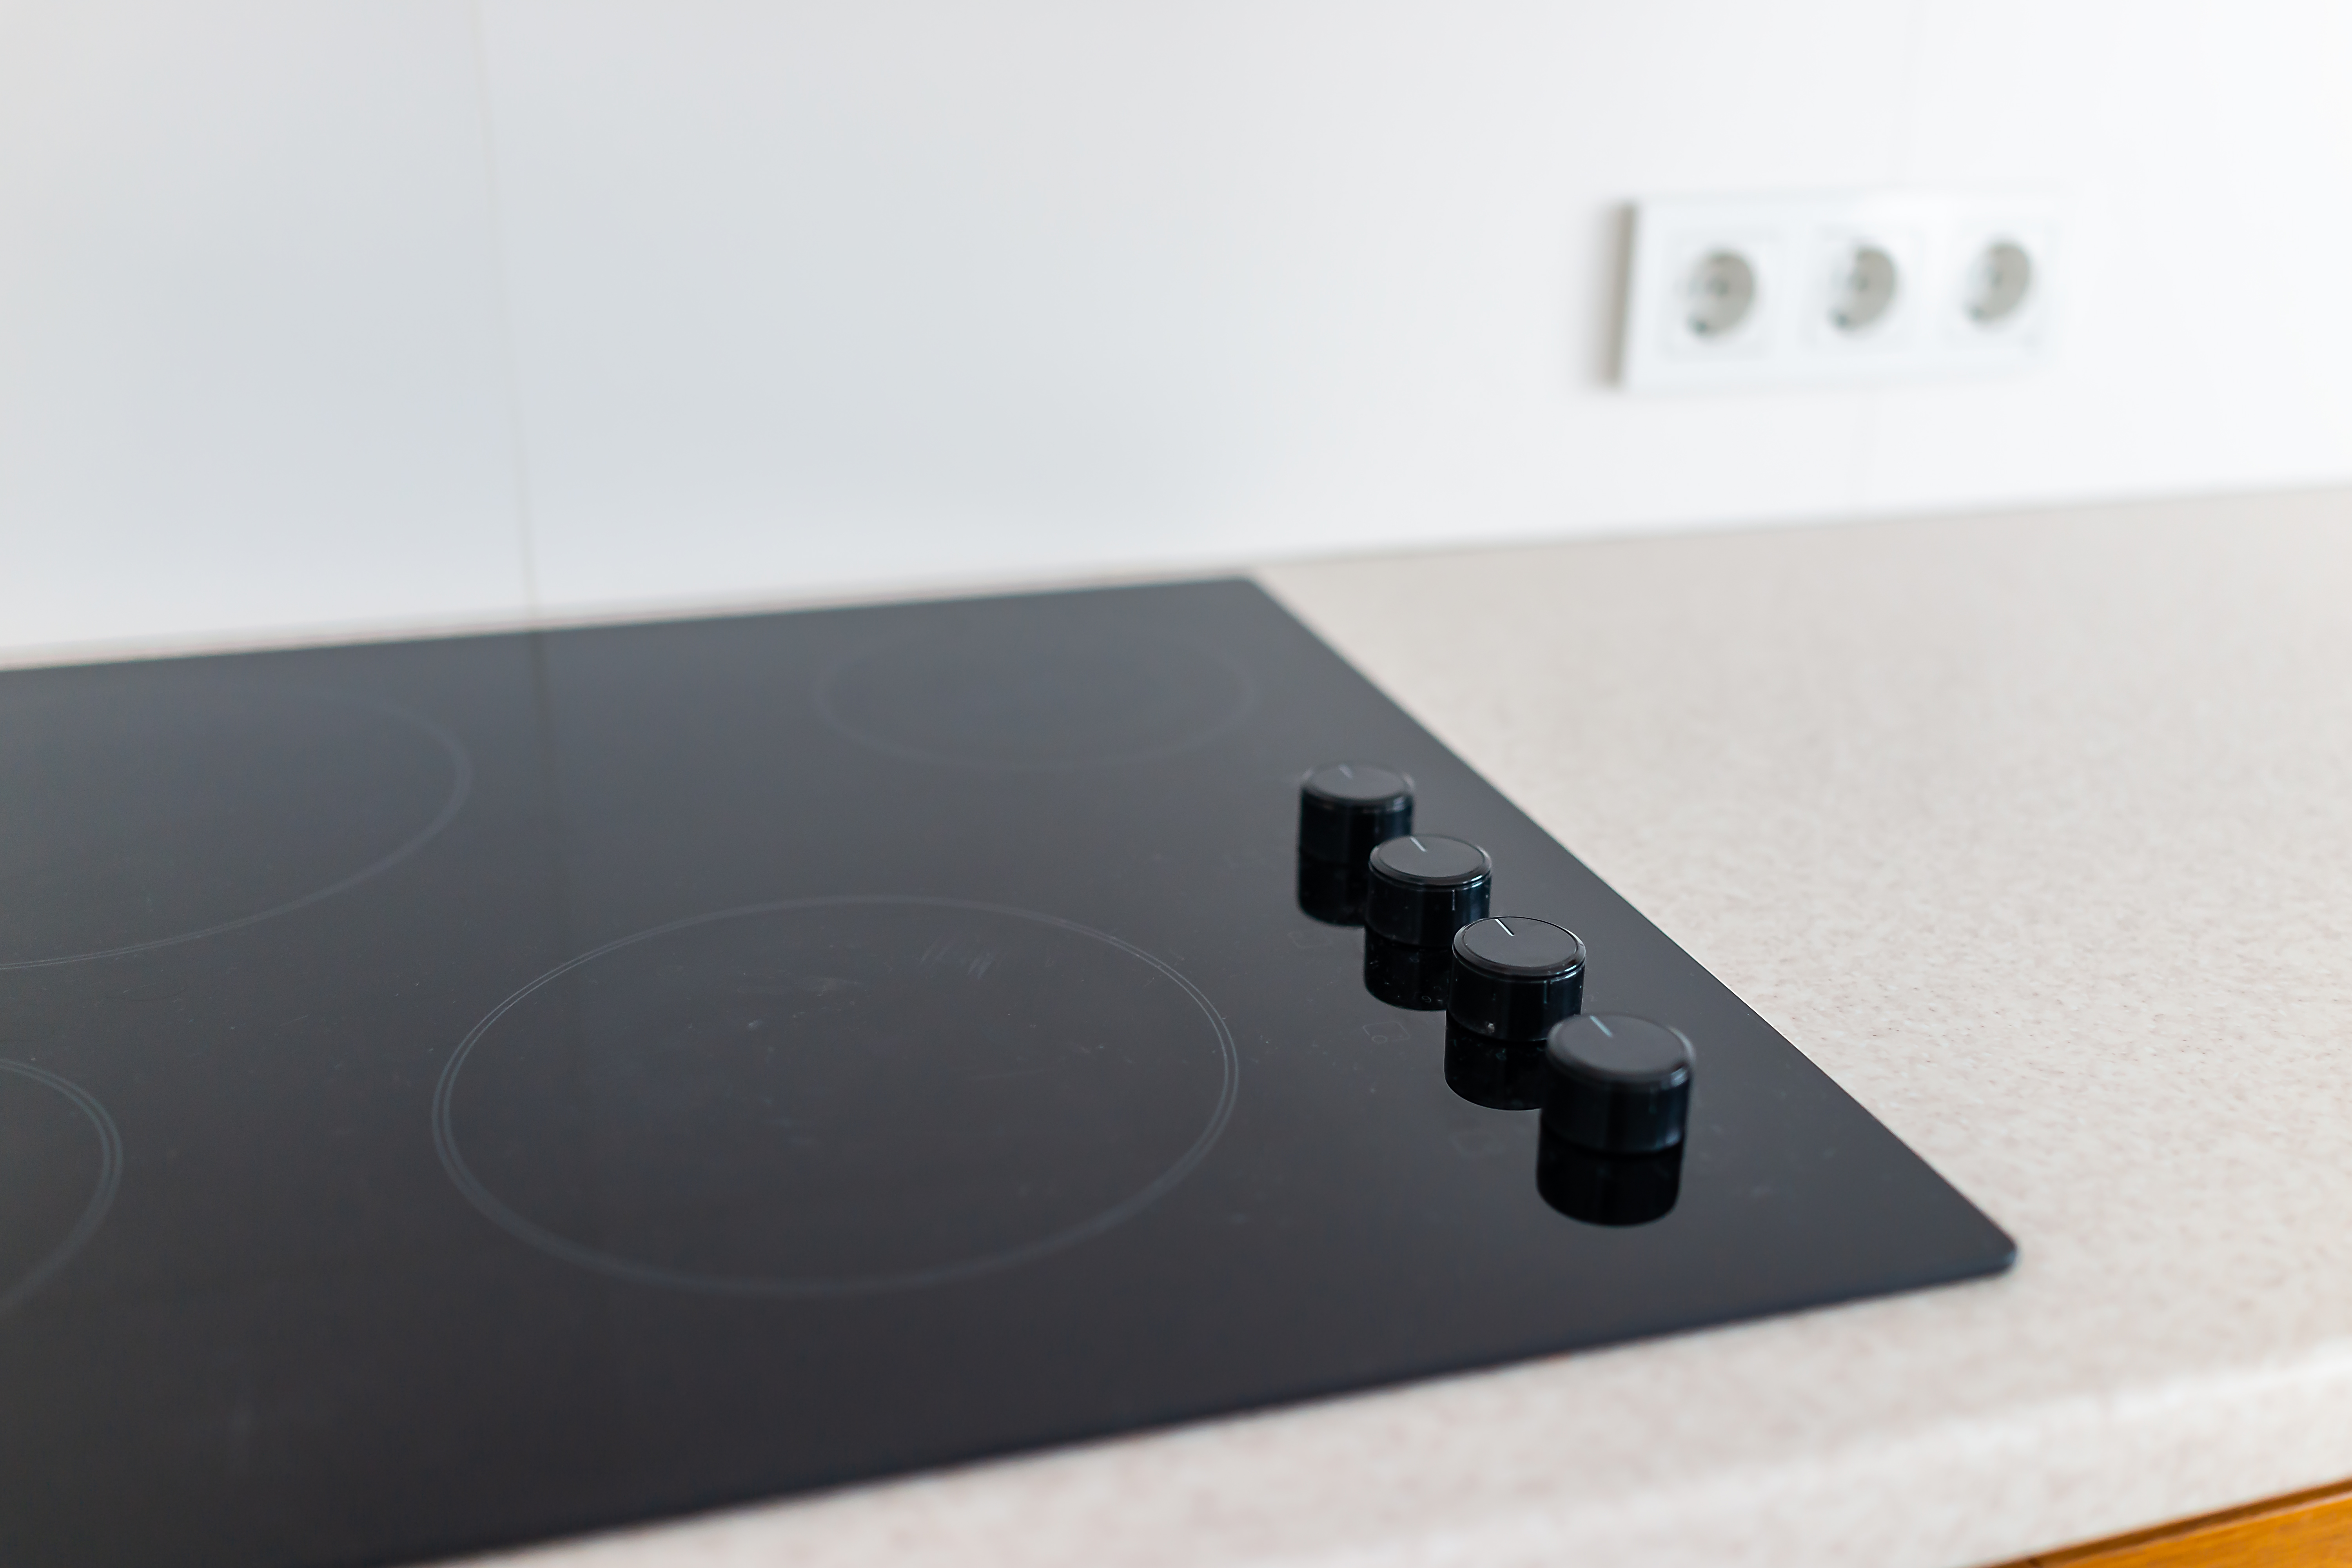 How to Remove a Glass Cooktop